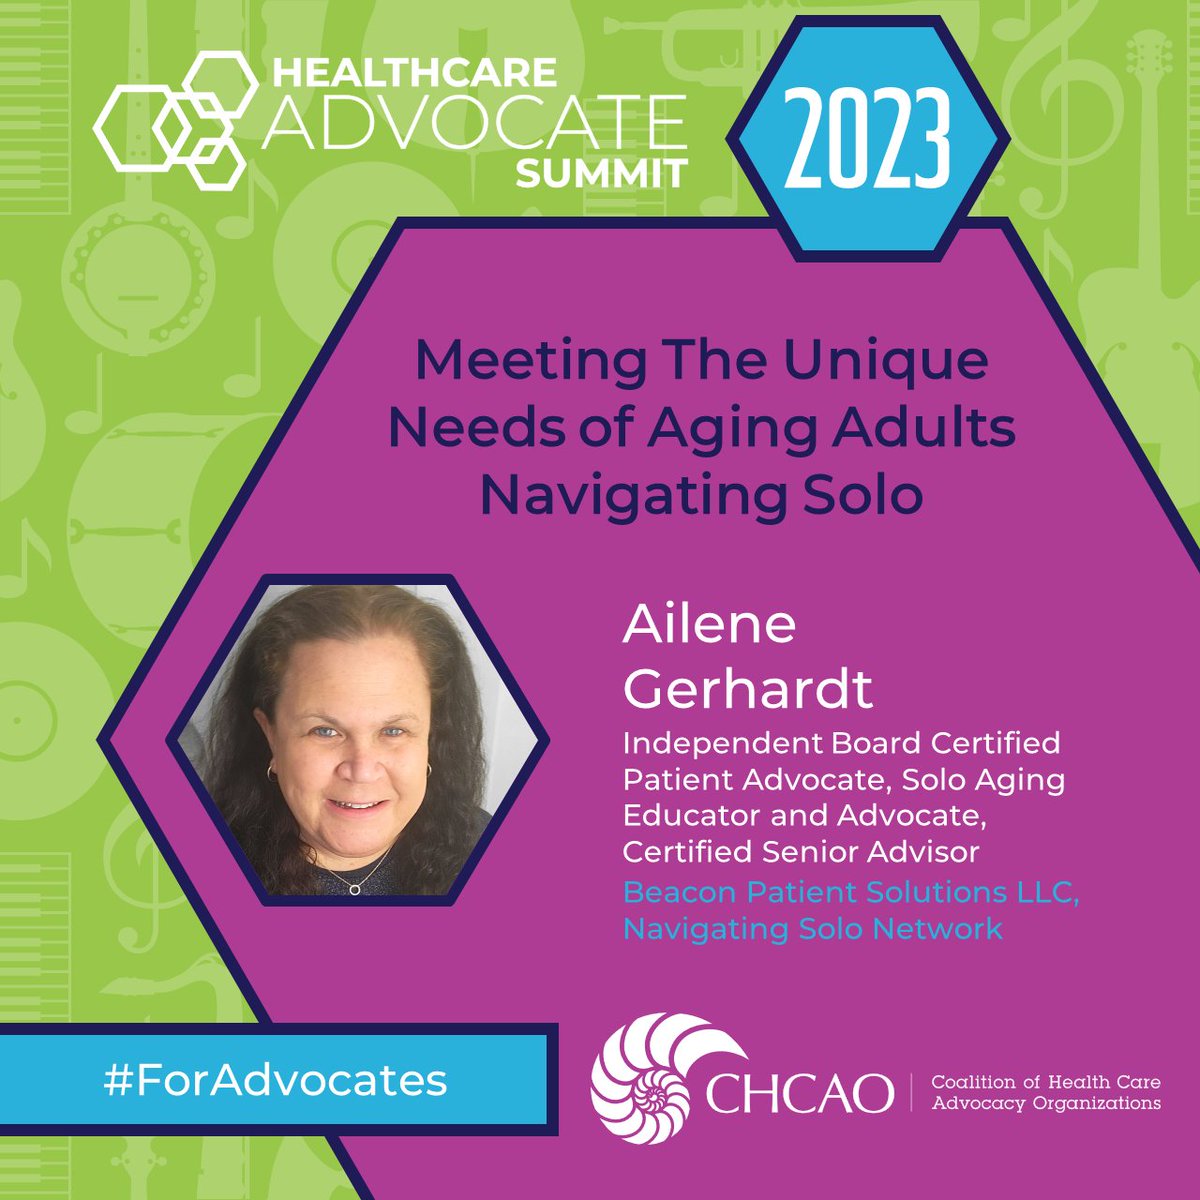 We are pleased to introduce Ailene Gerhardt as a distinguished member of our speaker faculty. Ailene is an Independent Board Certified Patient Advocate (BCPA) and the Founder of Beacon Patient Solutions LLC and the Navigating Solo Network. 

#BCPA #CHCAO #AgingAdults #SoloAging